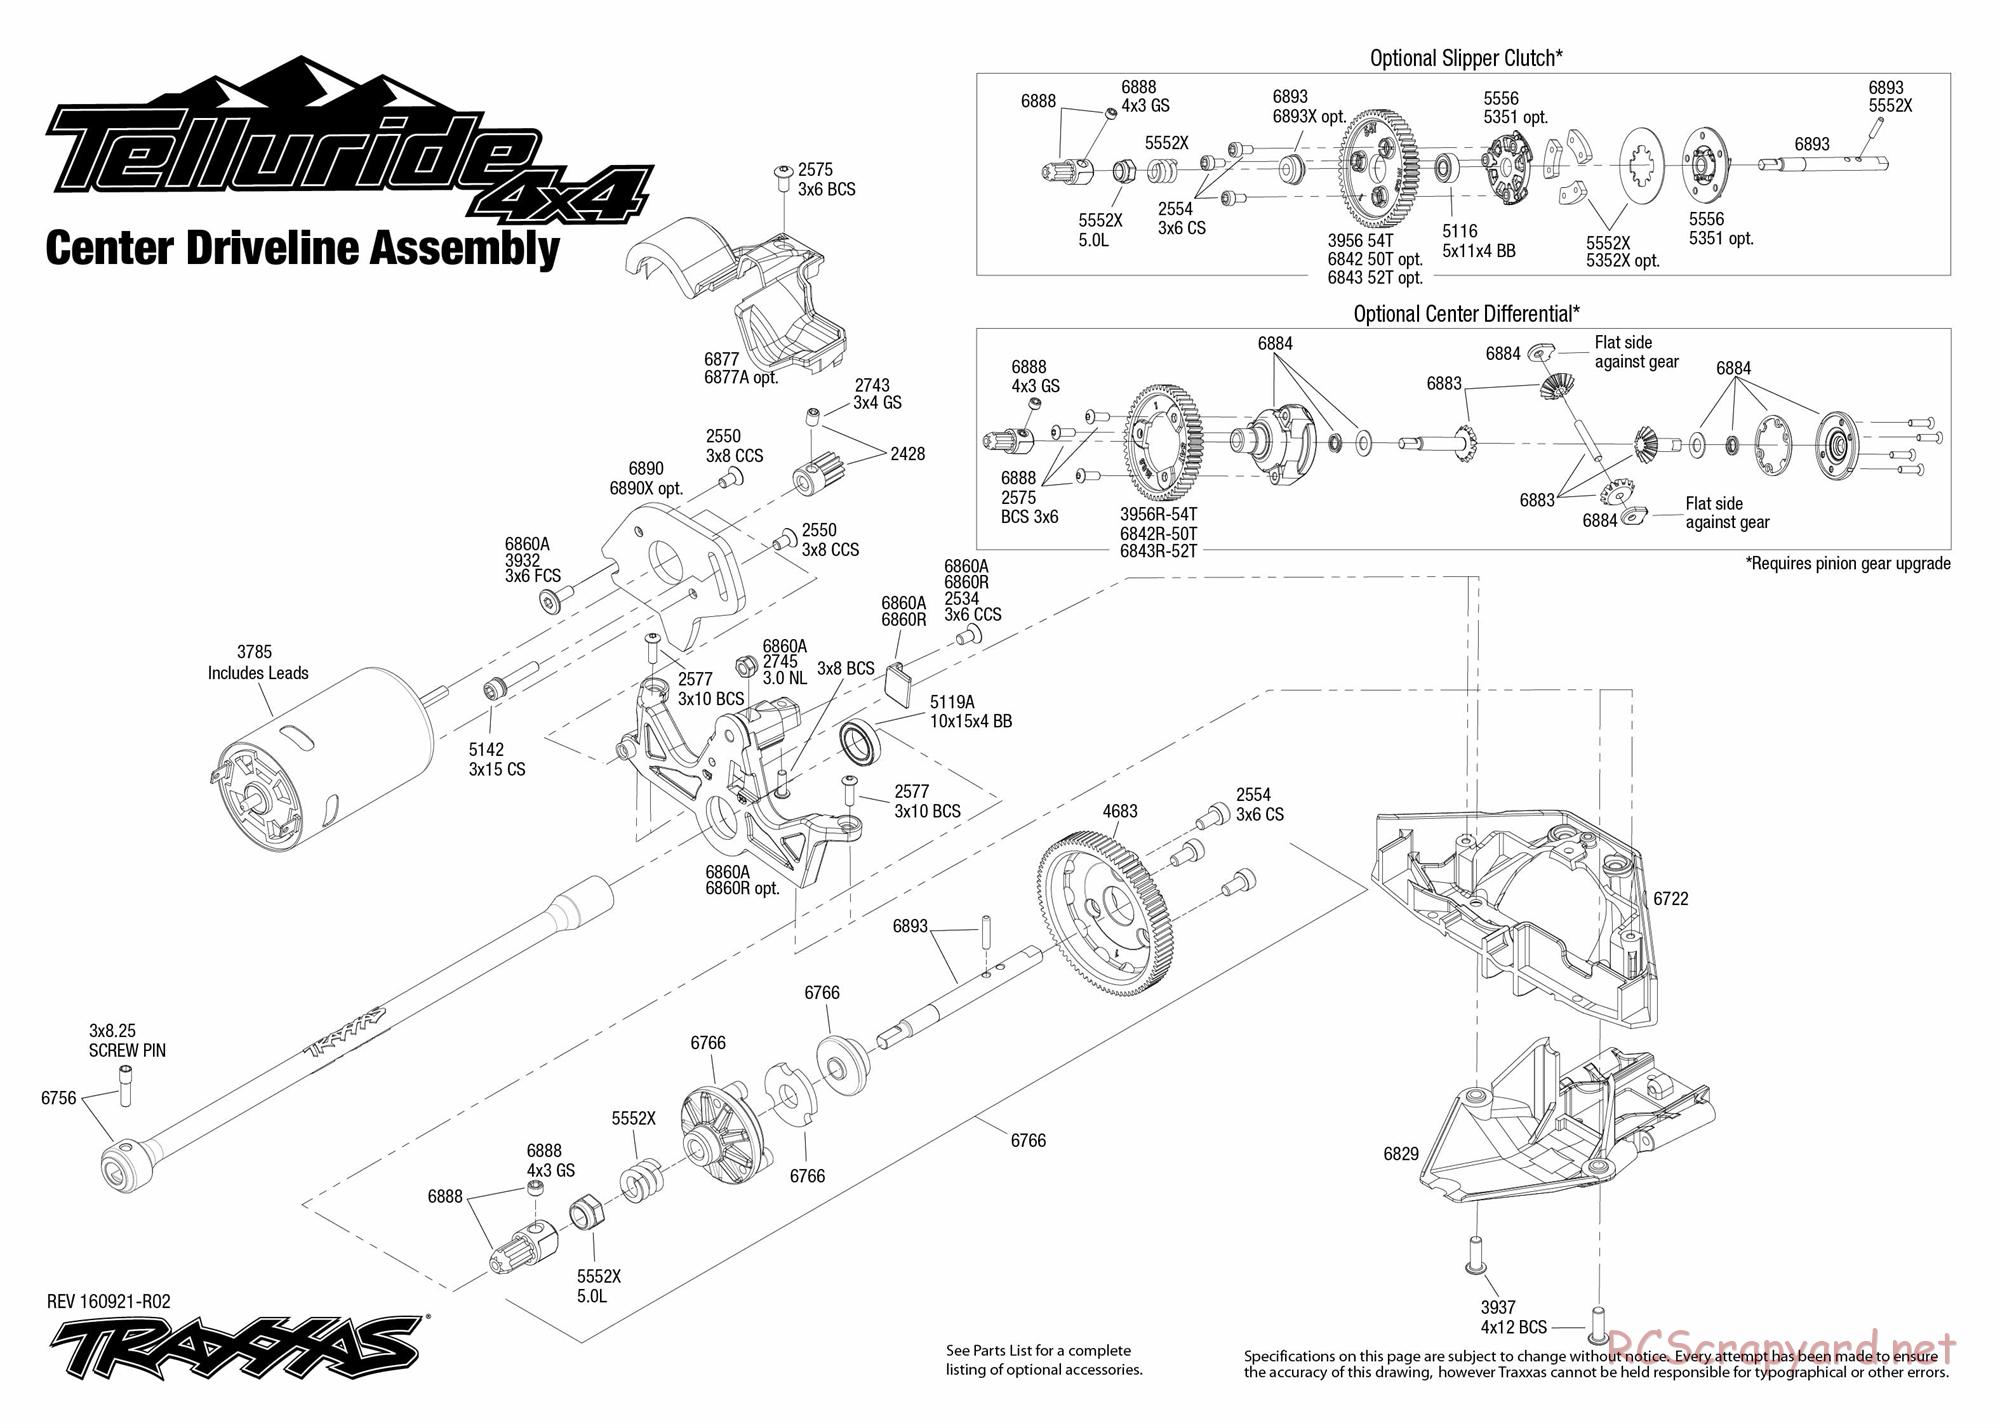 Traxxas - Telluride 4x4 (2015) - Exploded Views - Page 5